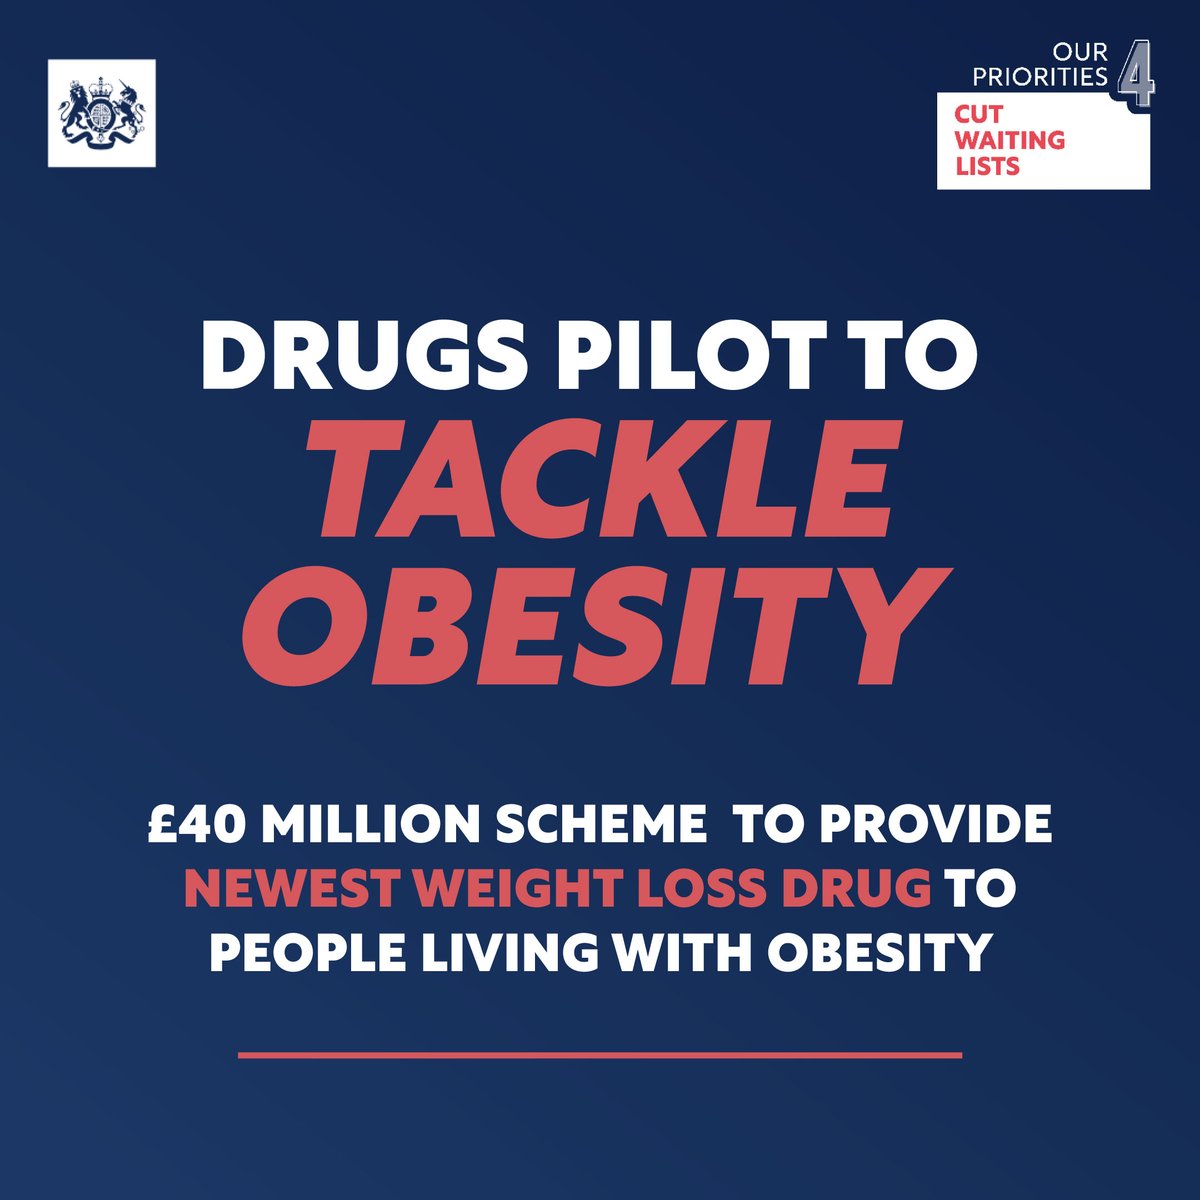 🆕 More people living with severe obesity will have access to the newest weight loss drugs. A £40 million pilot will explore how obesity drugs can be made accessible to patients in the community to help reduce pressure on the NHS & cut waiting lists. gov.uk/government/new…